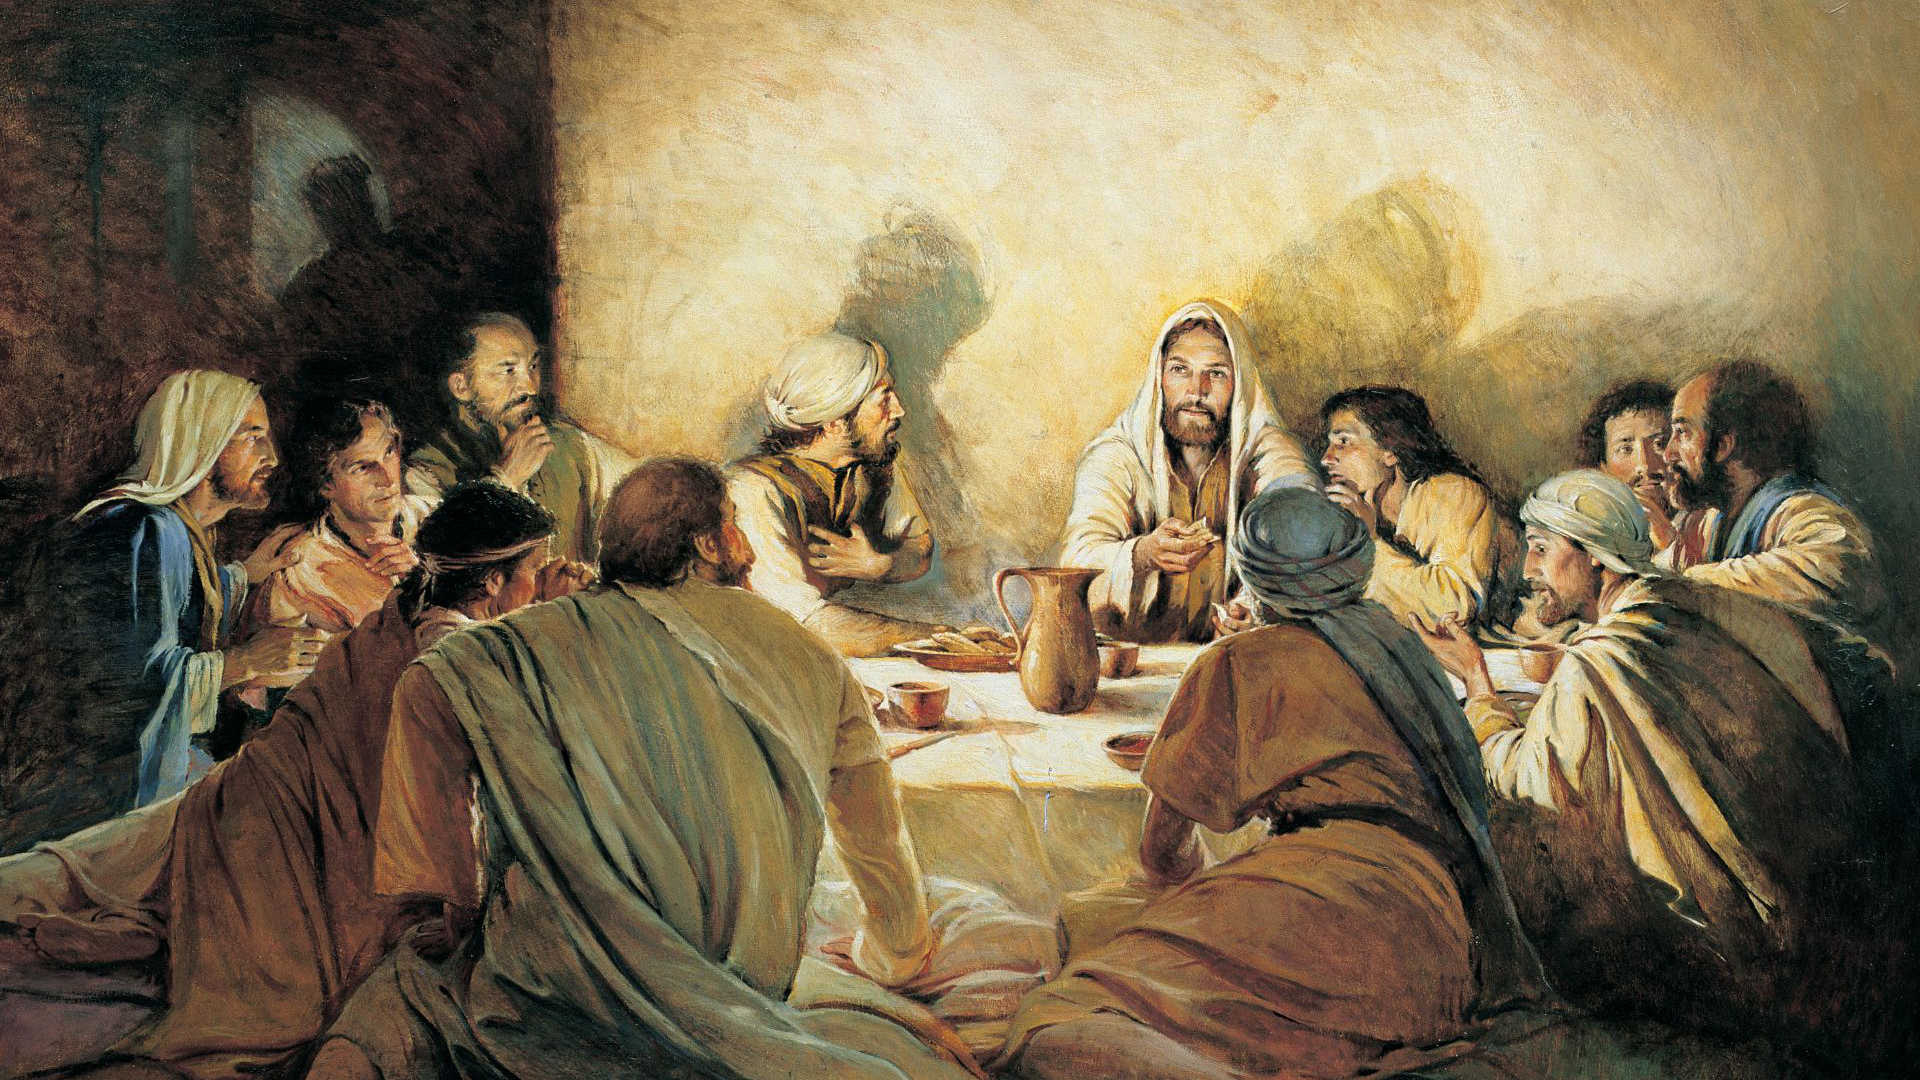 Walter Rane's painting, "In Remembrance of Me," depicting Jesus Christ breaking bread and teaching his disciples at the last supper